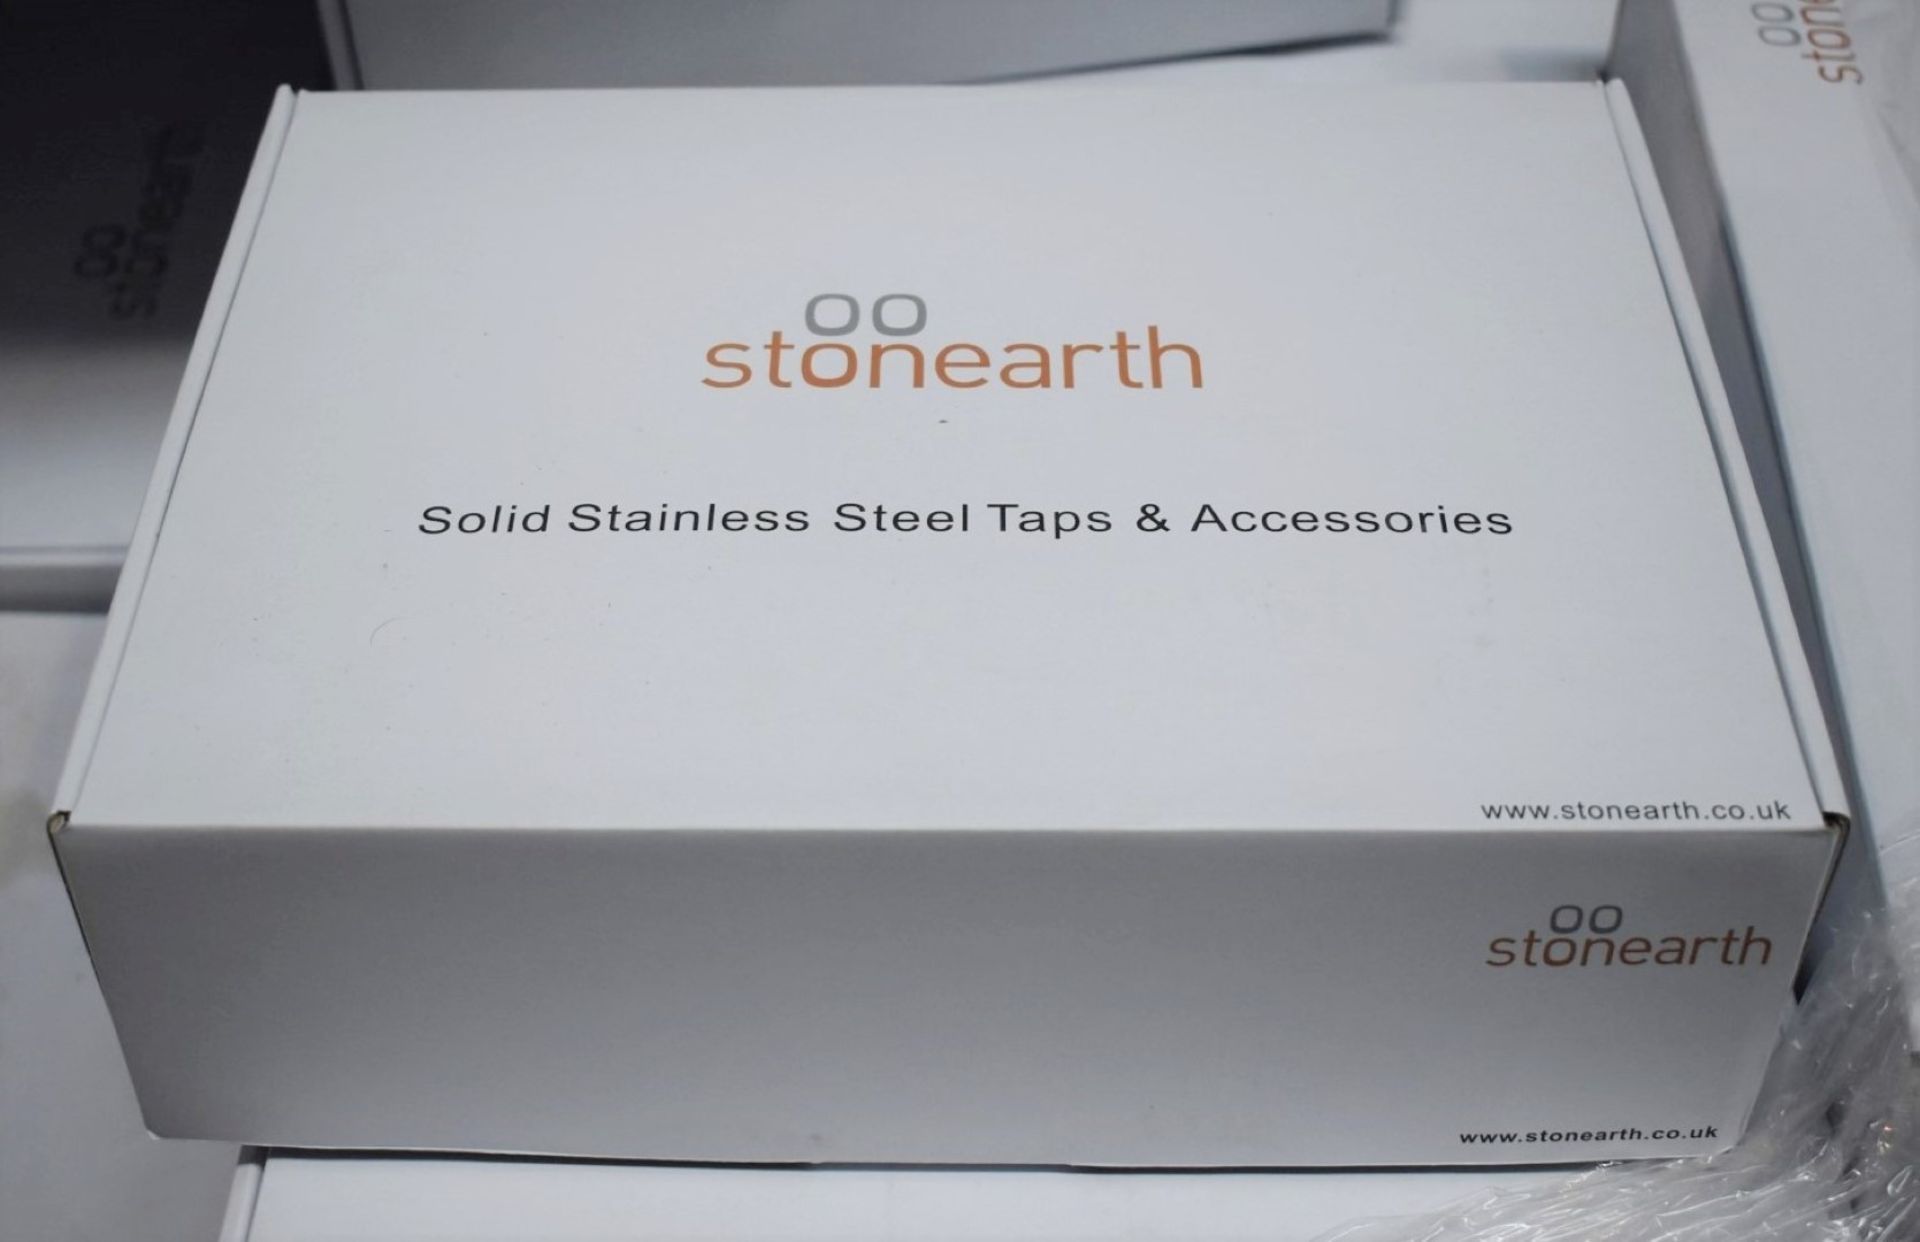 1 x Stonearth 'Metro' Stainless Steel Basin Mixer Tap - Brand New & Boxed - RRP £245 - Ref: TP821 P6 - Image 5 of 5